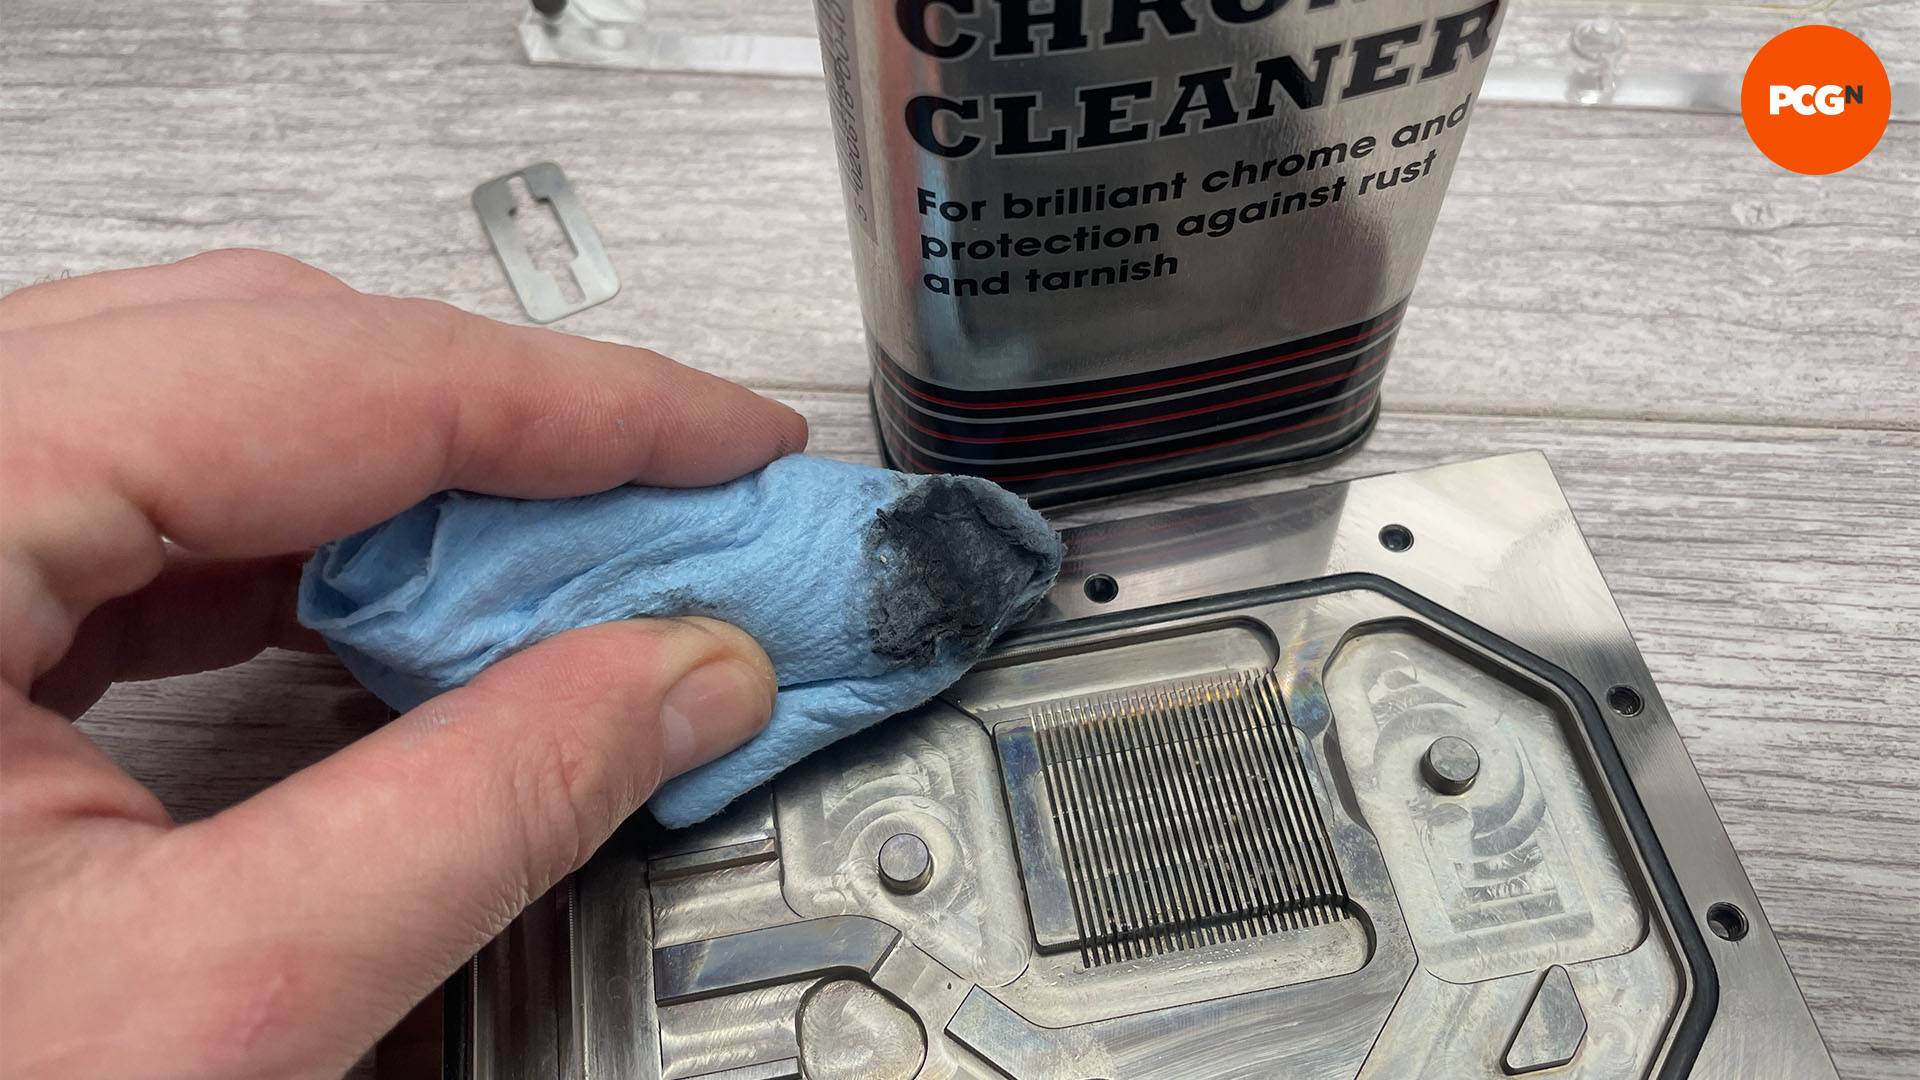 How to clean a waterblock: Use metal polish